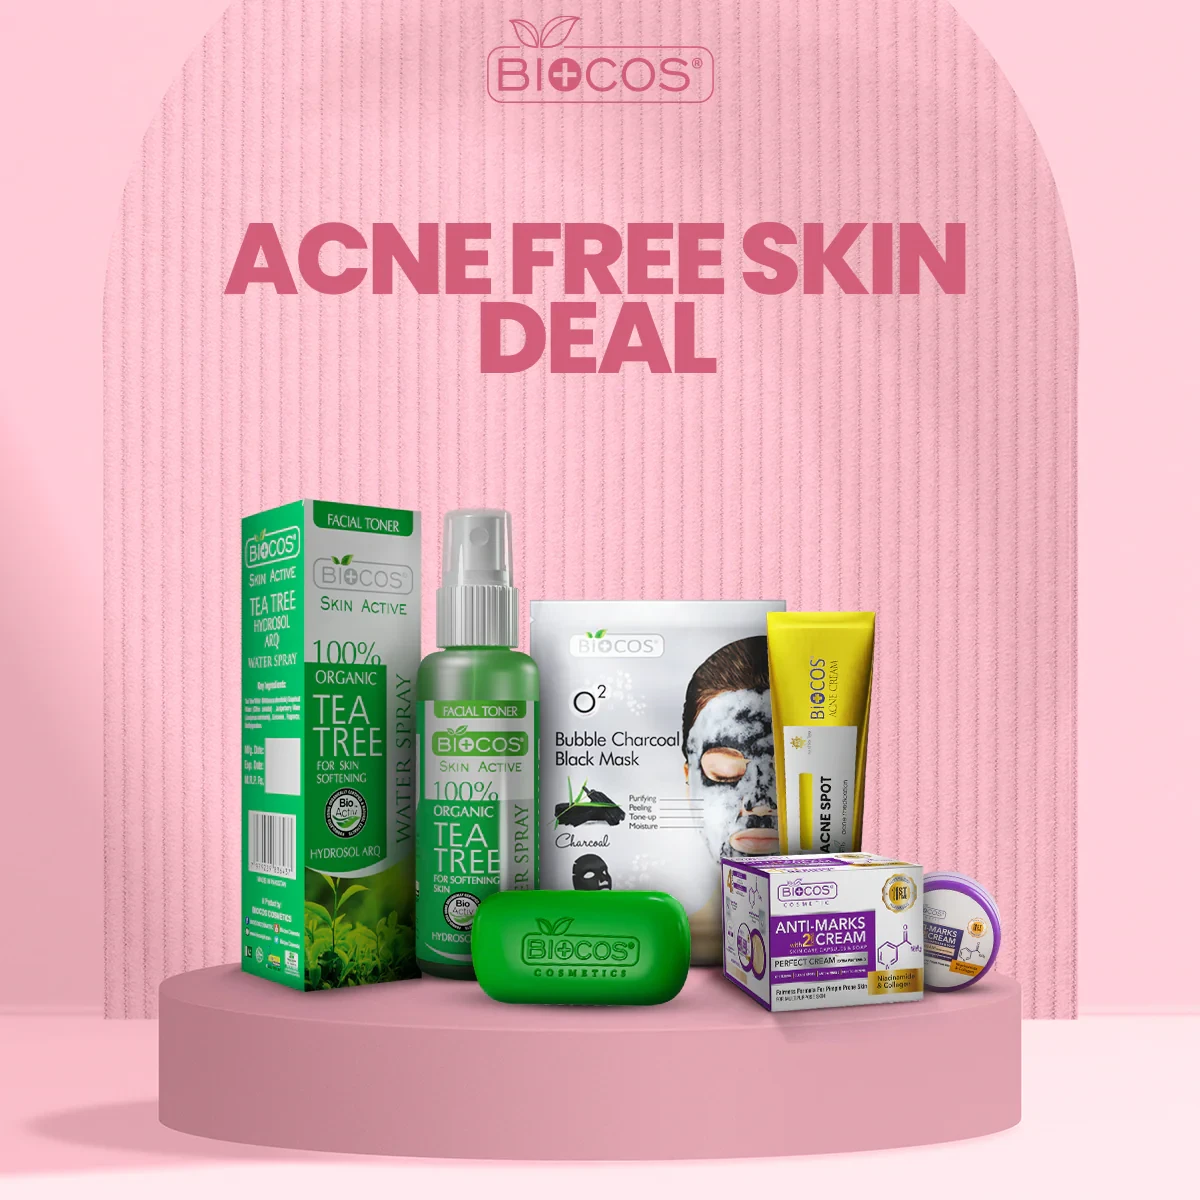 Acne Free Deal